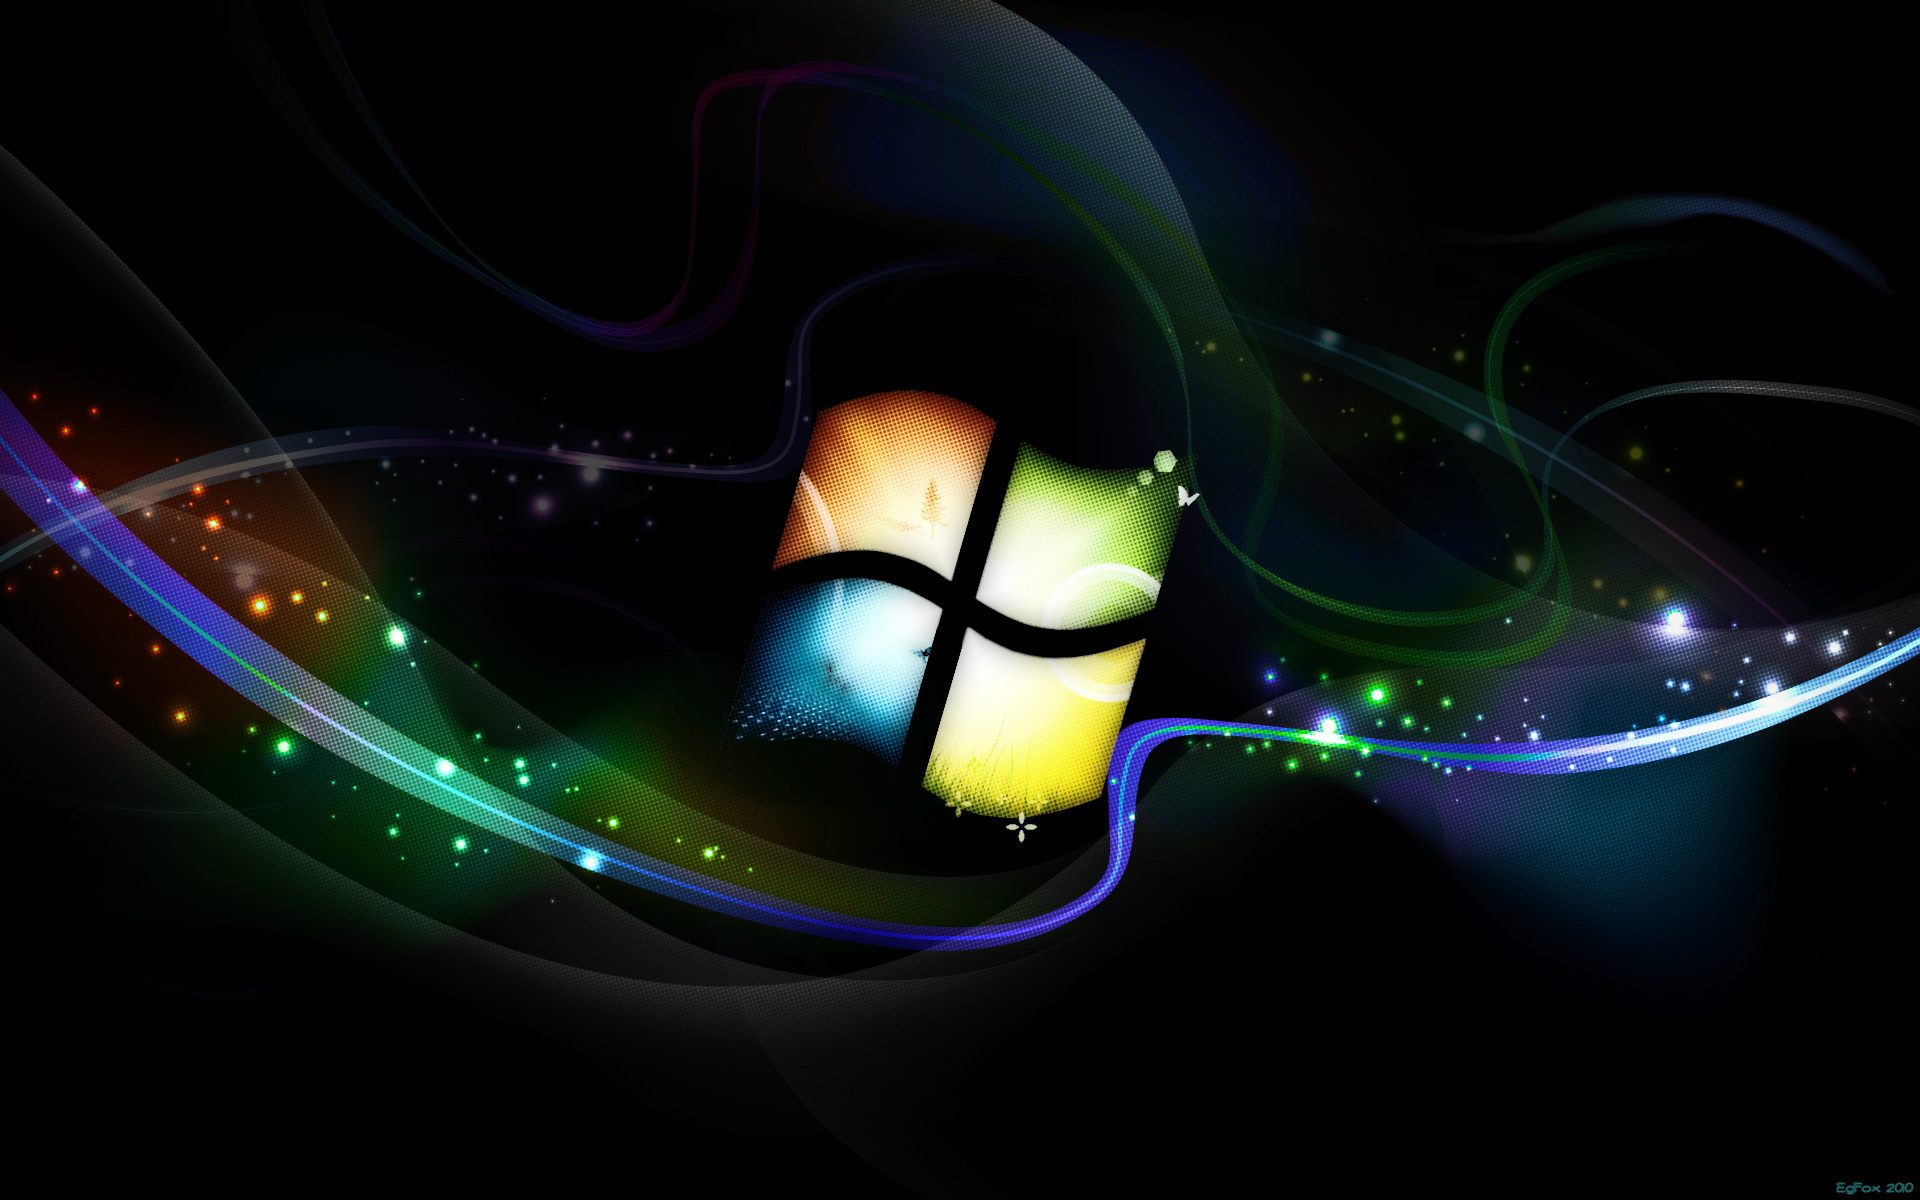 Free download download a free and high quality windows xp wallpaper for